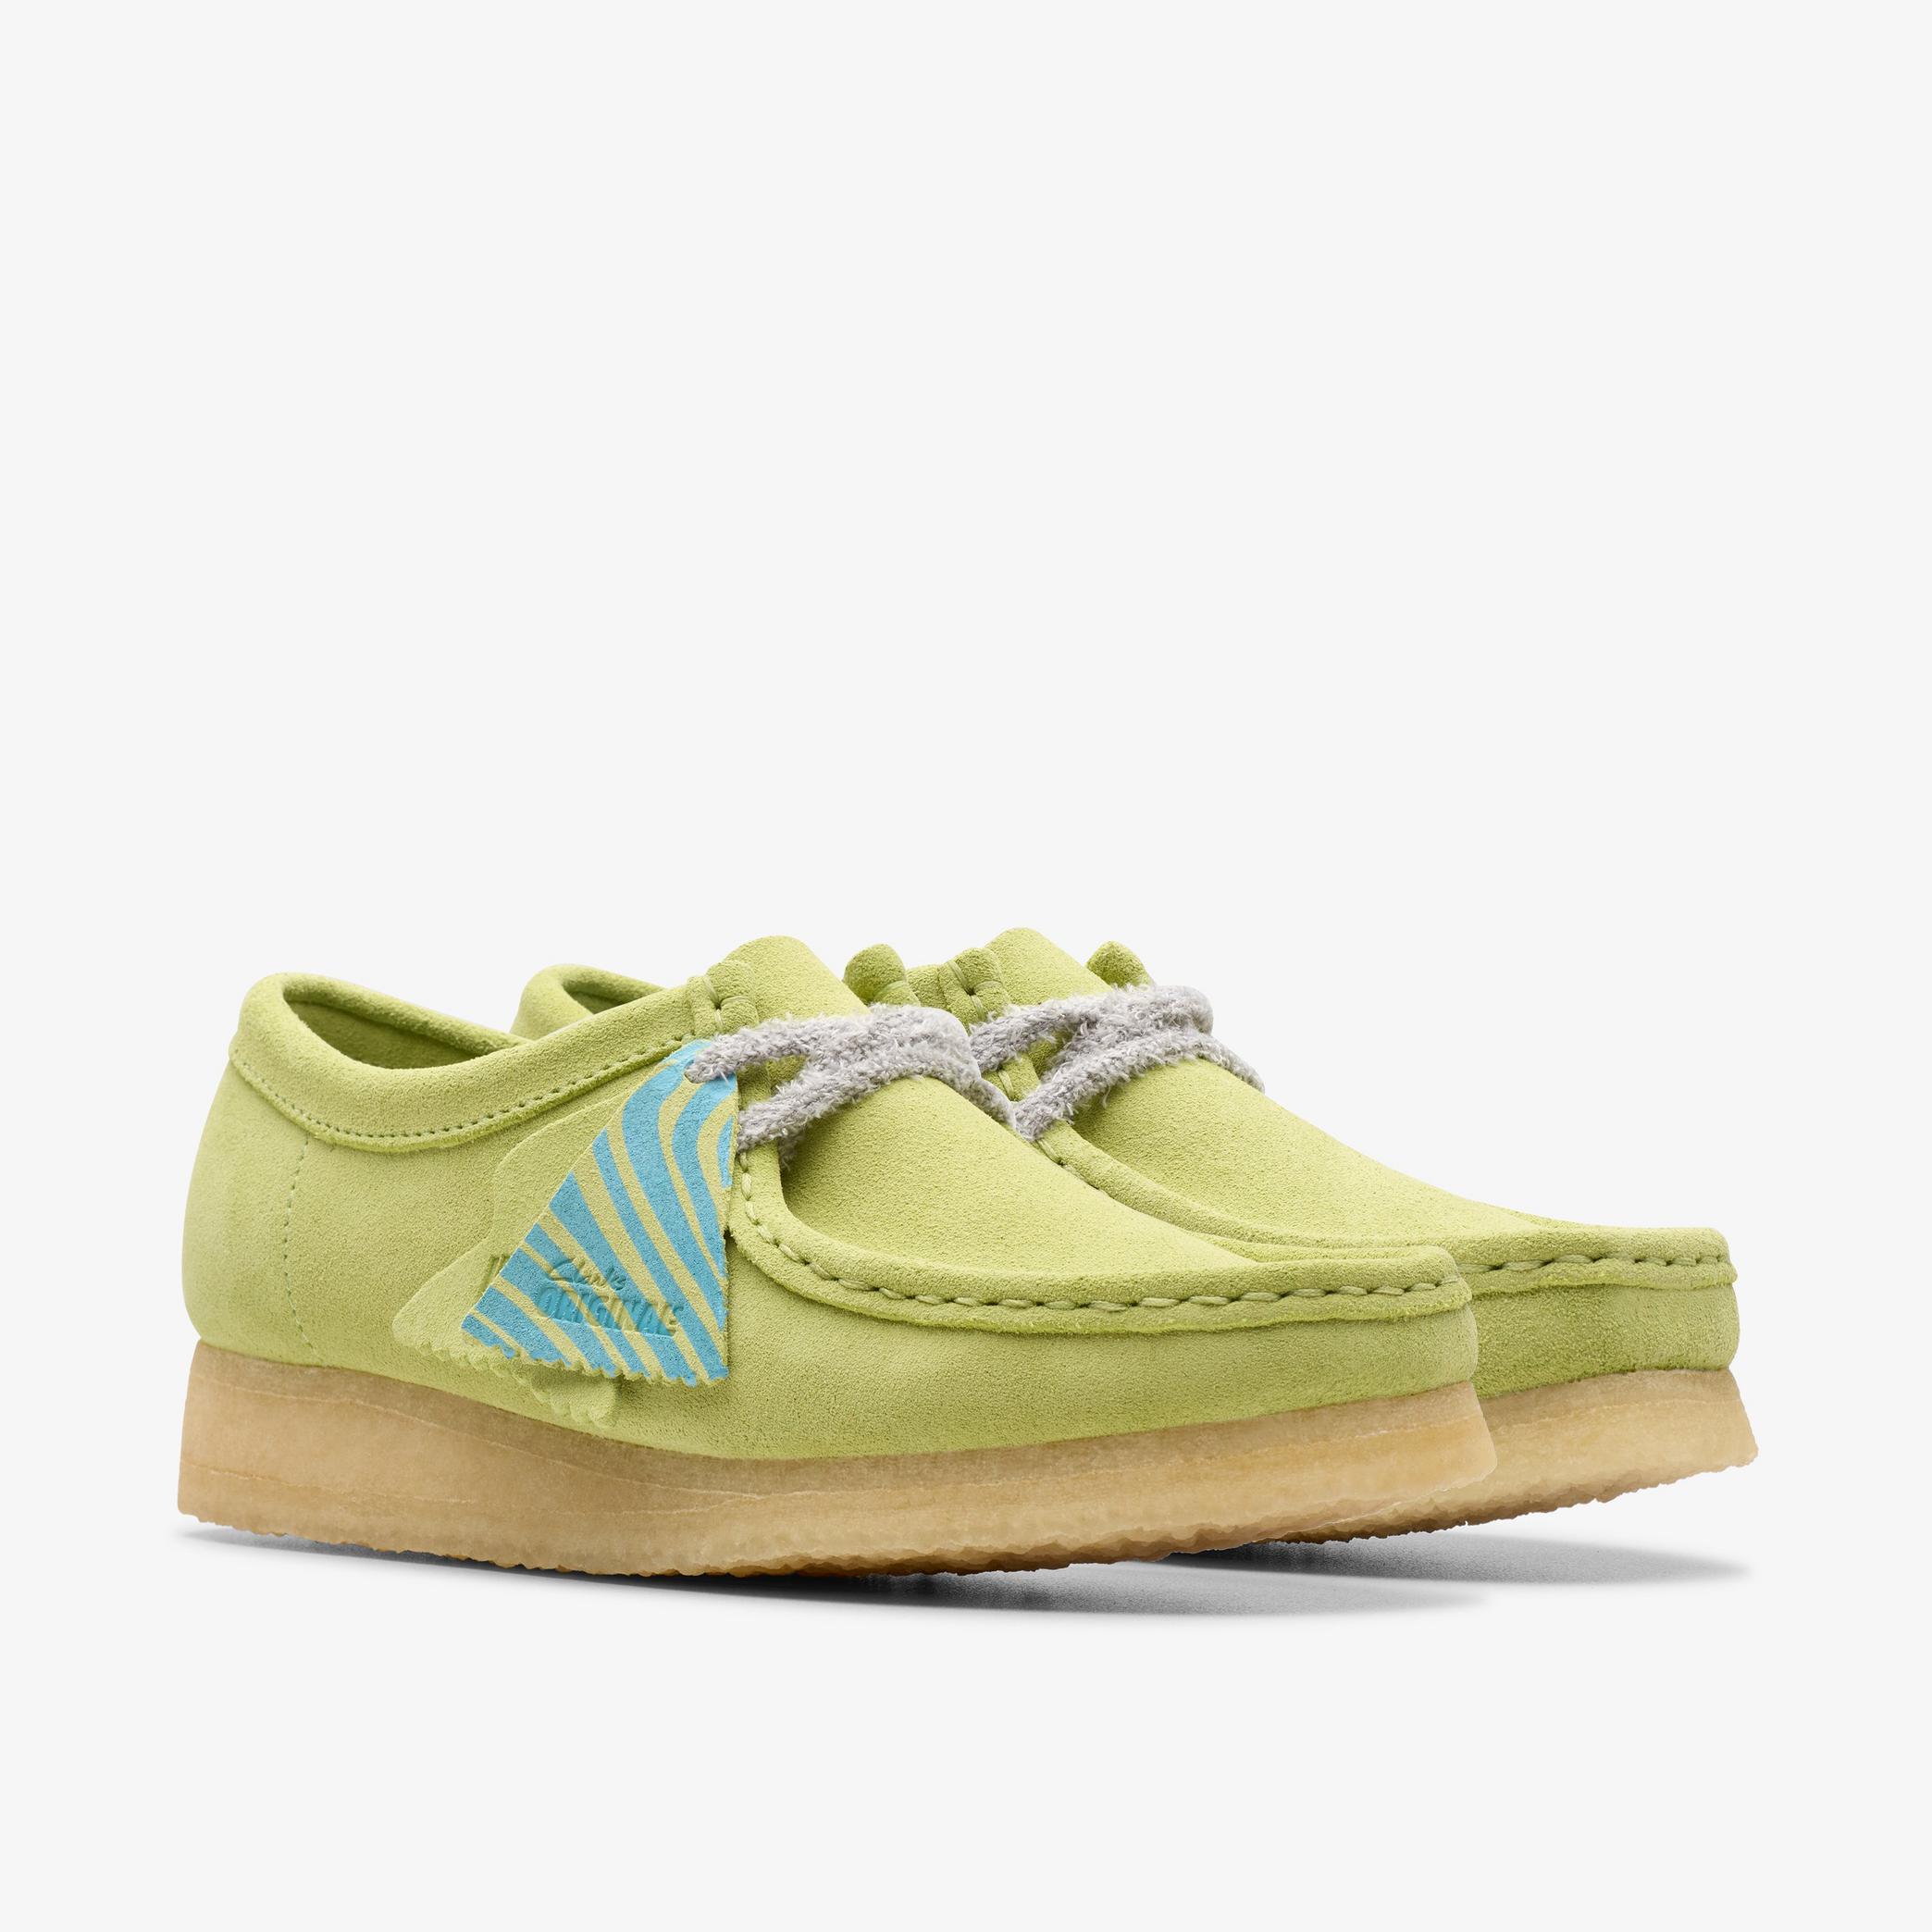 Wallabee Pale Lime Suede Wallabee, view 4 of 7